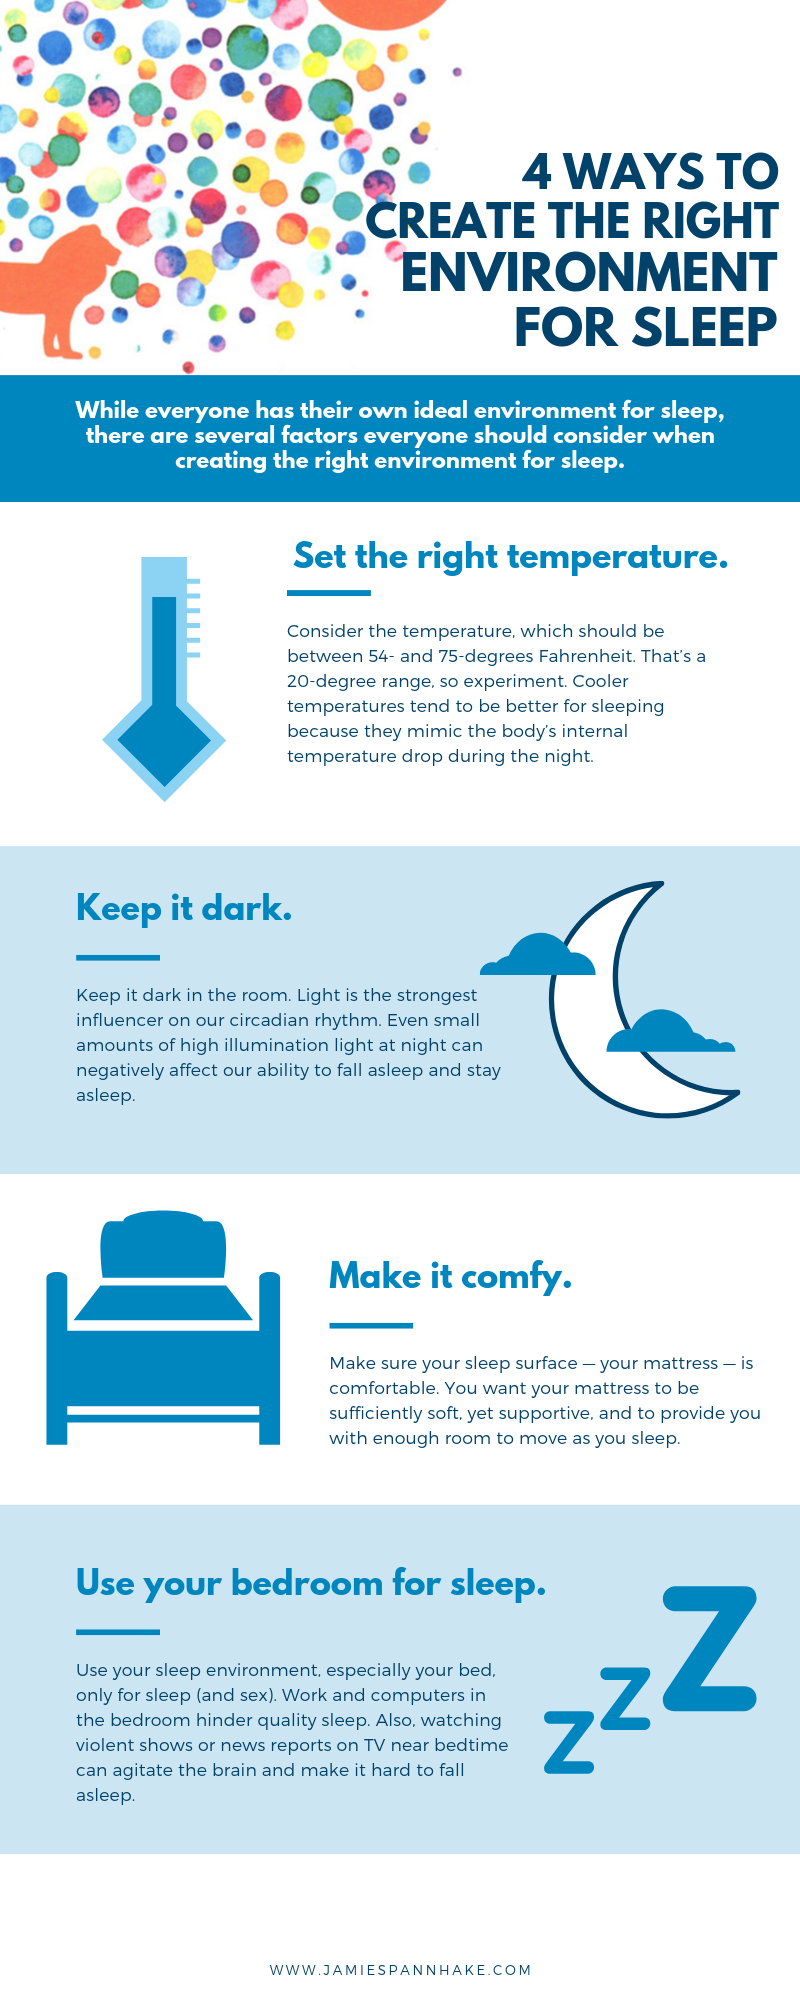 4 Ways to Create the Right Environment for Sleep